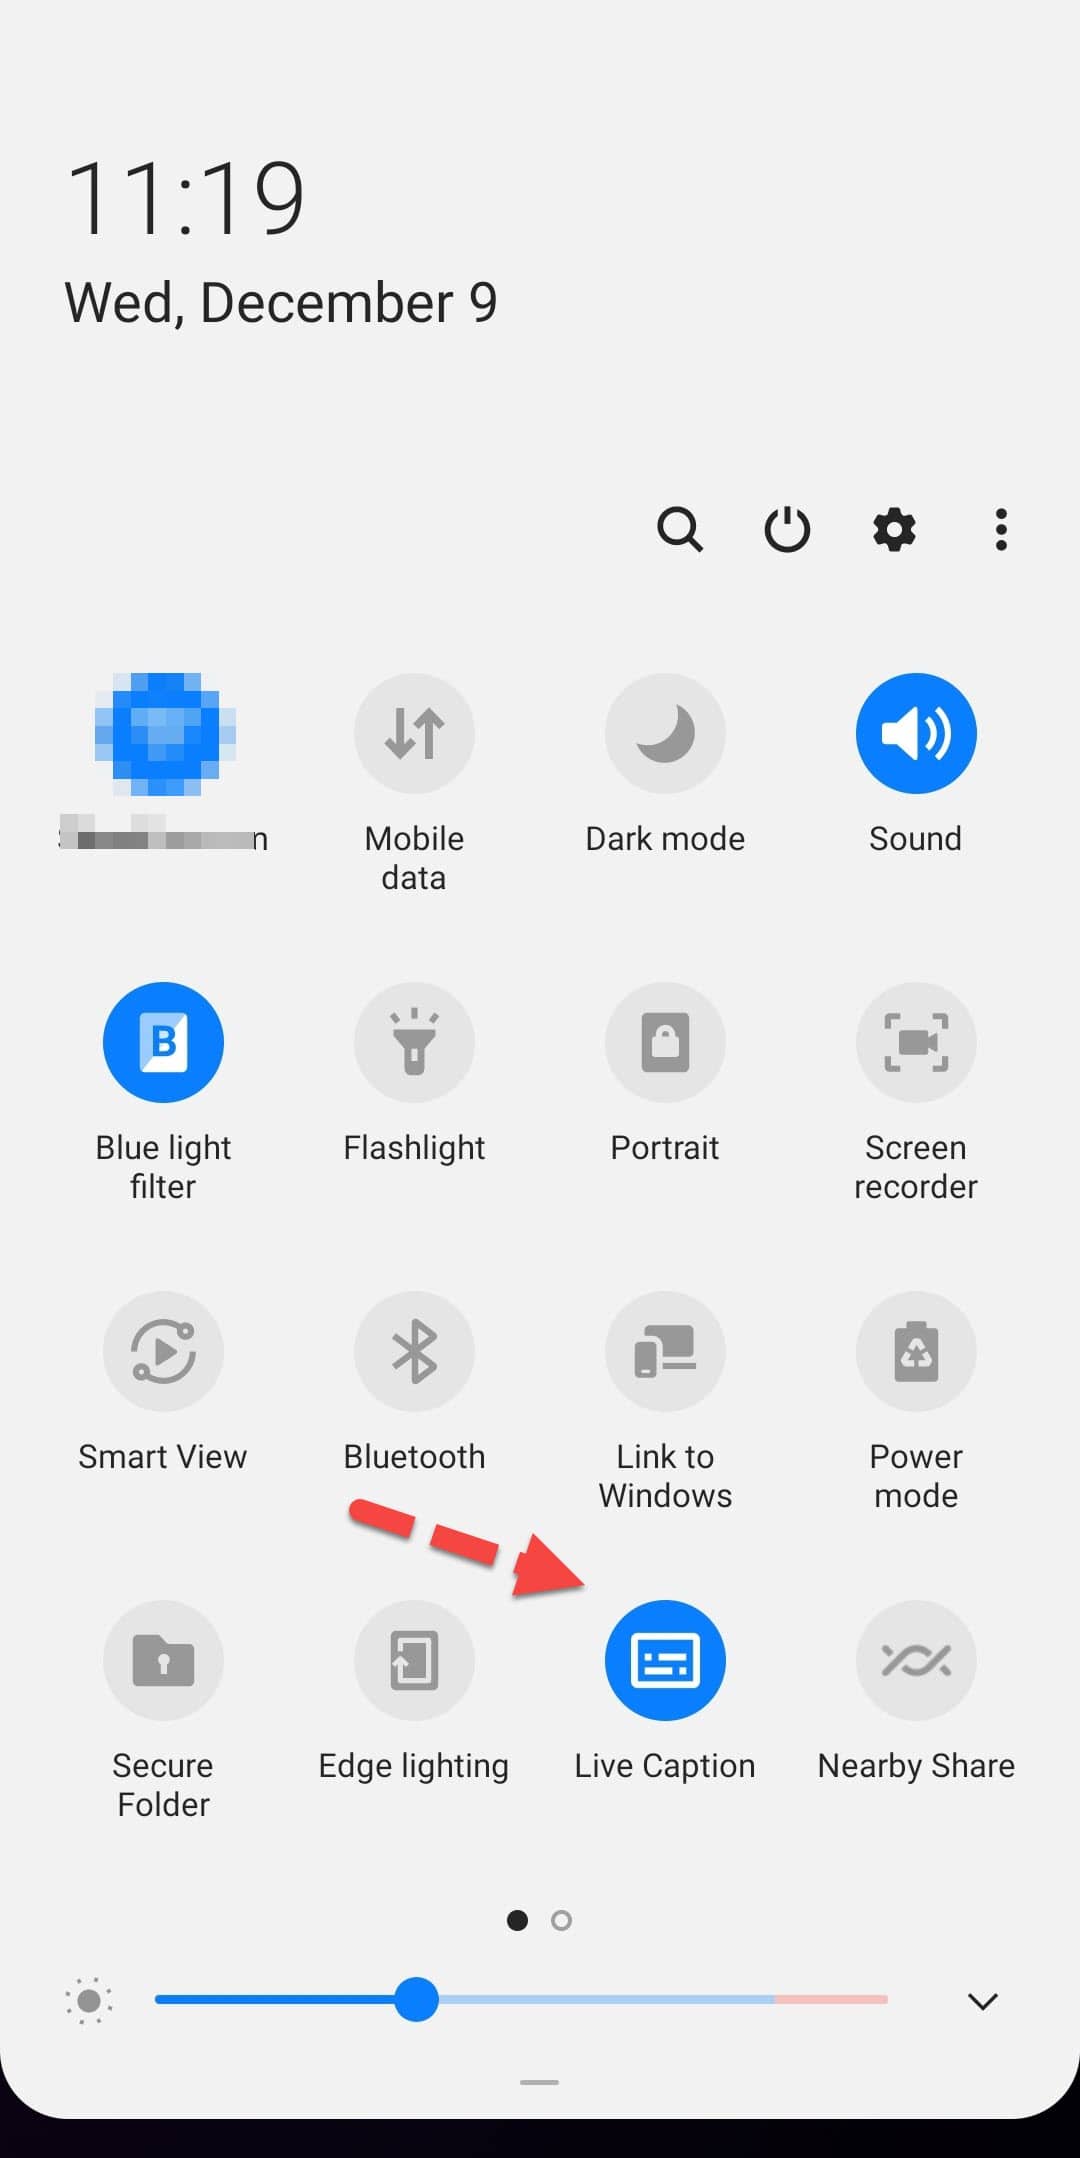 How to Turn on Live Caption on Samsung Galaxy S9, S10 One UI 2.5